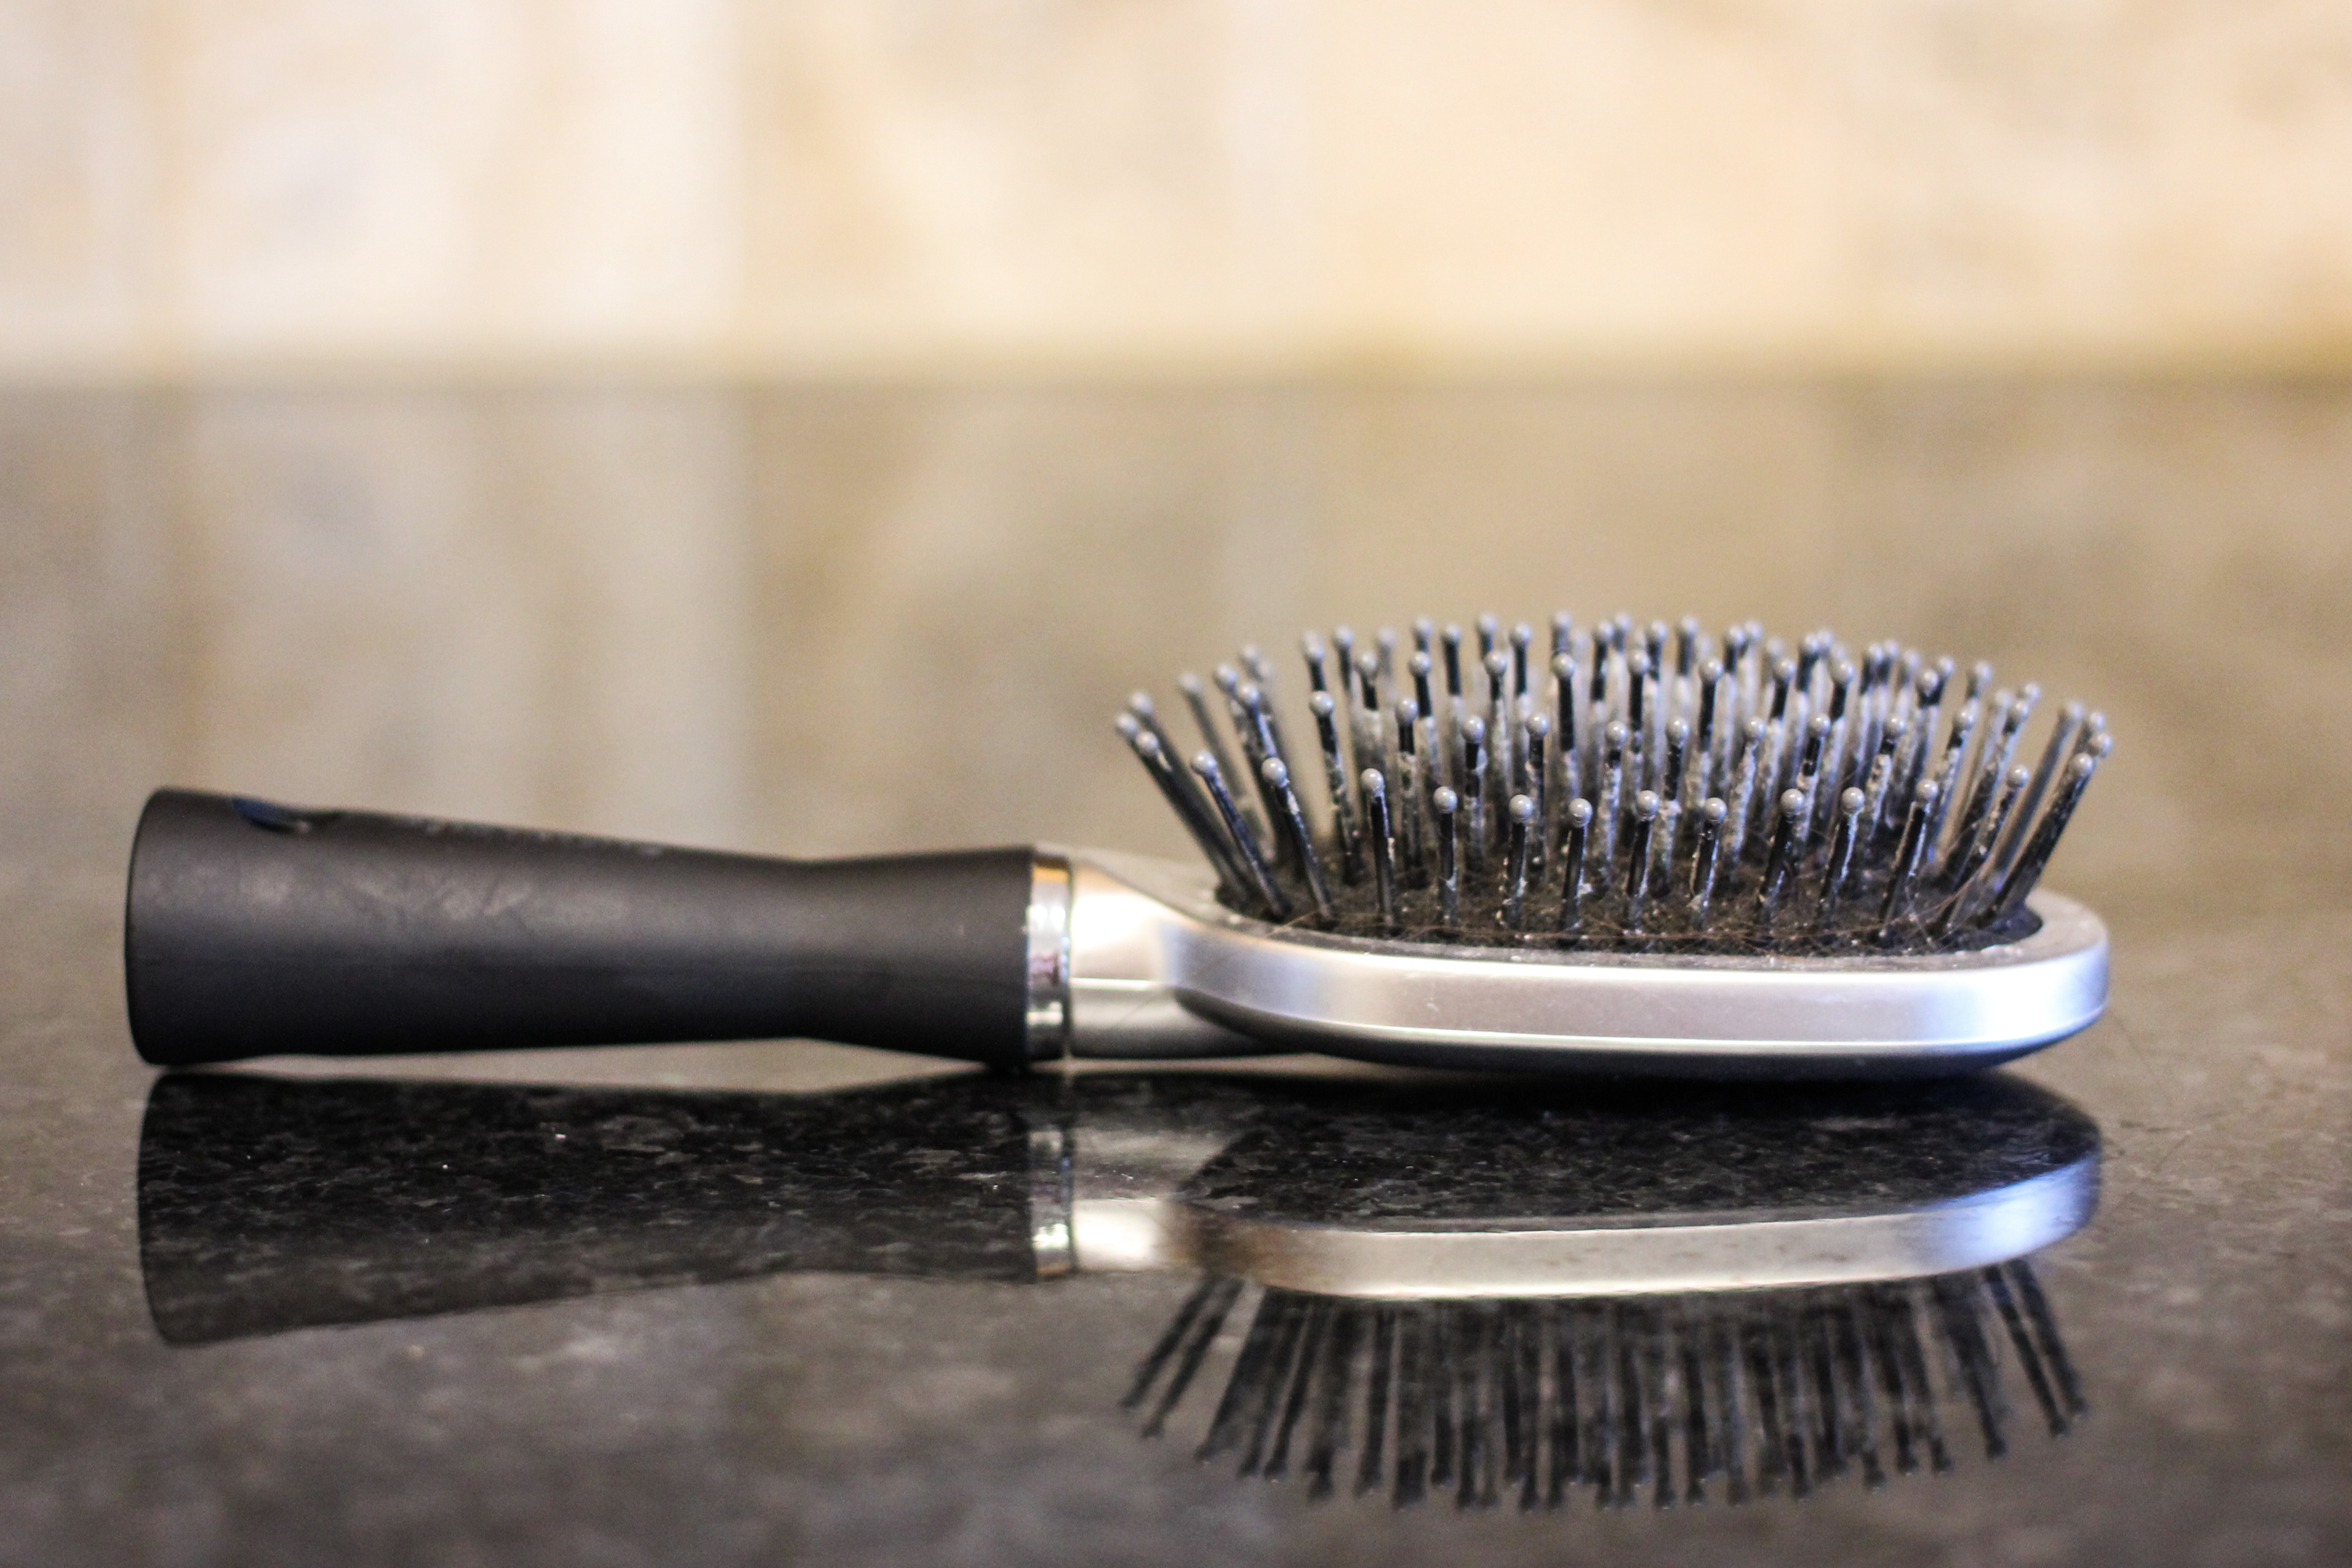 How to Clean Hair Brushes the Right Way! (Including the lint